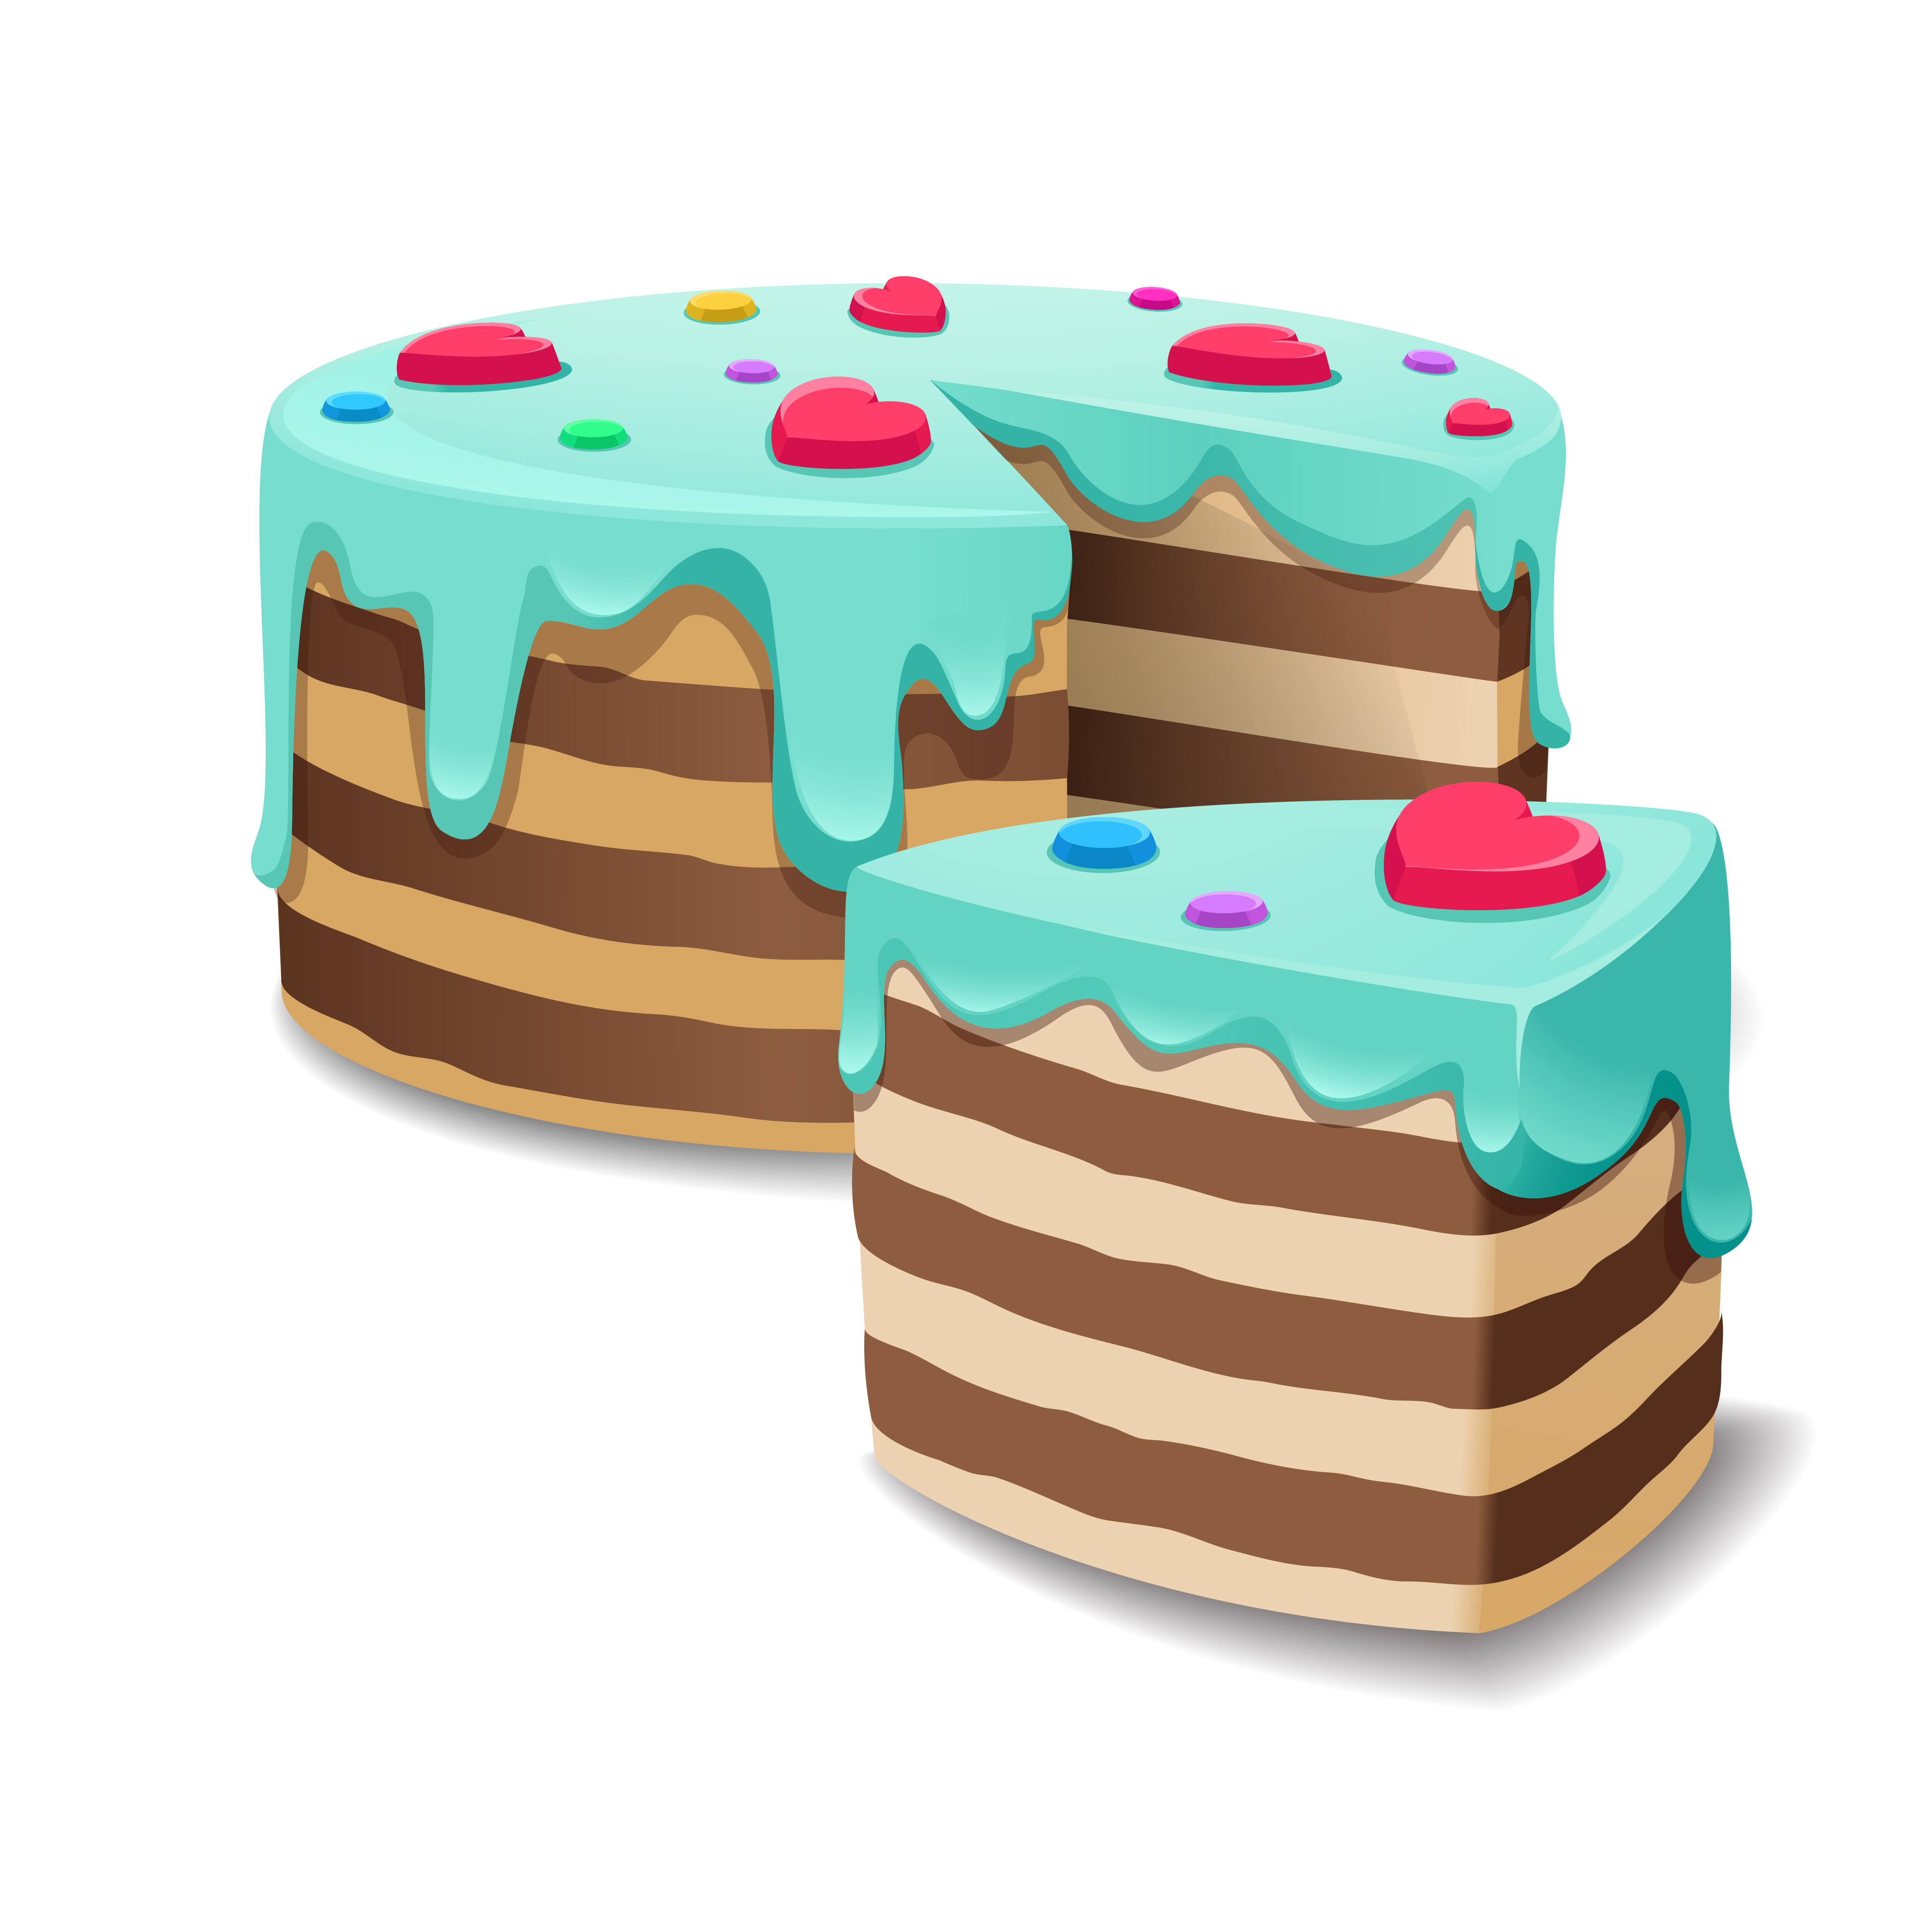 "Image showing a cut piece of cake"